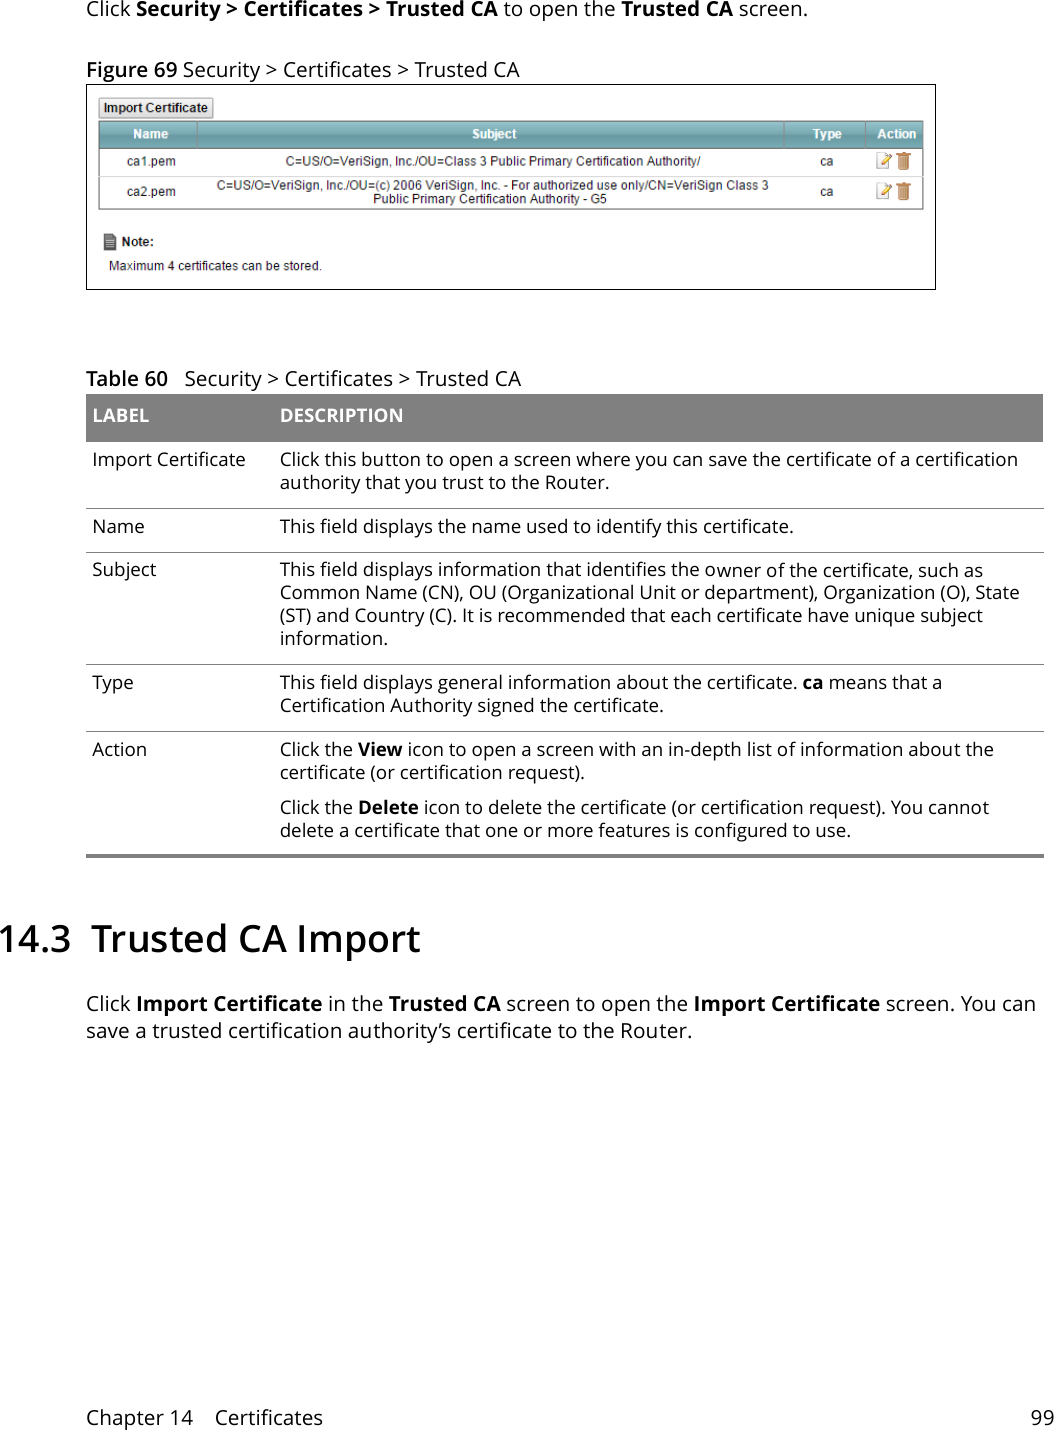 Chapter 14    Certificates 99Click Security &gt; Certificates &gt; Trusted CA to open the Trusted CA screen. Figure 69 Security &gt; Certificates &gt; Trusted CA Table 60   Security &gt; Certificates &gt; Trusted CA LABEL DESCRIPTIONImport Certificate Click this button to open a screen where you can save the certificate of a certification authority that you trust to the Router.Name This field displays the name used to identify this certificate. Subject This field displays information that identifies the owner of the certificate, such as Common Name (CN), OU (Organizational Unit or department), Organization (O), State (ST) and Country (C). It is recommended that each certificate have unique subject information.Type This field displays general information about the certificate. ca means that a Certification Authority signed the certificate. Action Click the View icon to open a screen with an in-depth list of information about the certificate (or certification request).Click the Delete icon to delete the certificate (or certification request). You cannot delete a certificate that one or more features is configured to use.14.3  Trusted CA Import   Click Import Certificate in the Trusted CA screen to open the Import Certificate screen. You can save a trusted certification authority’s certificate to the Router.